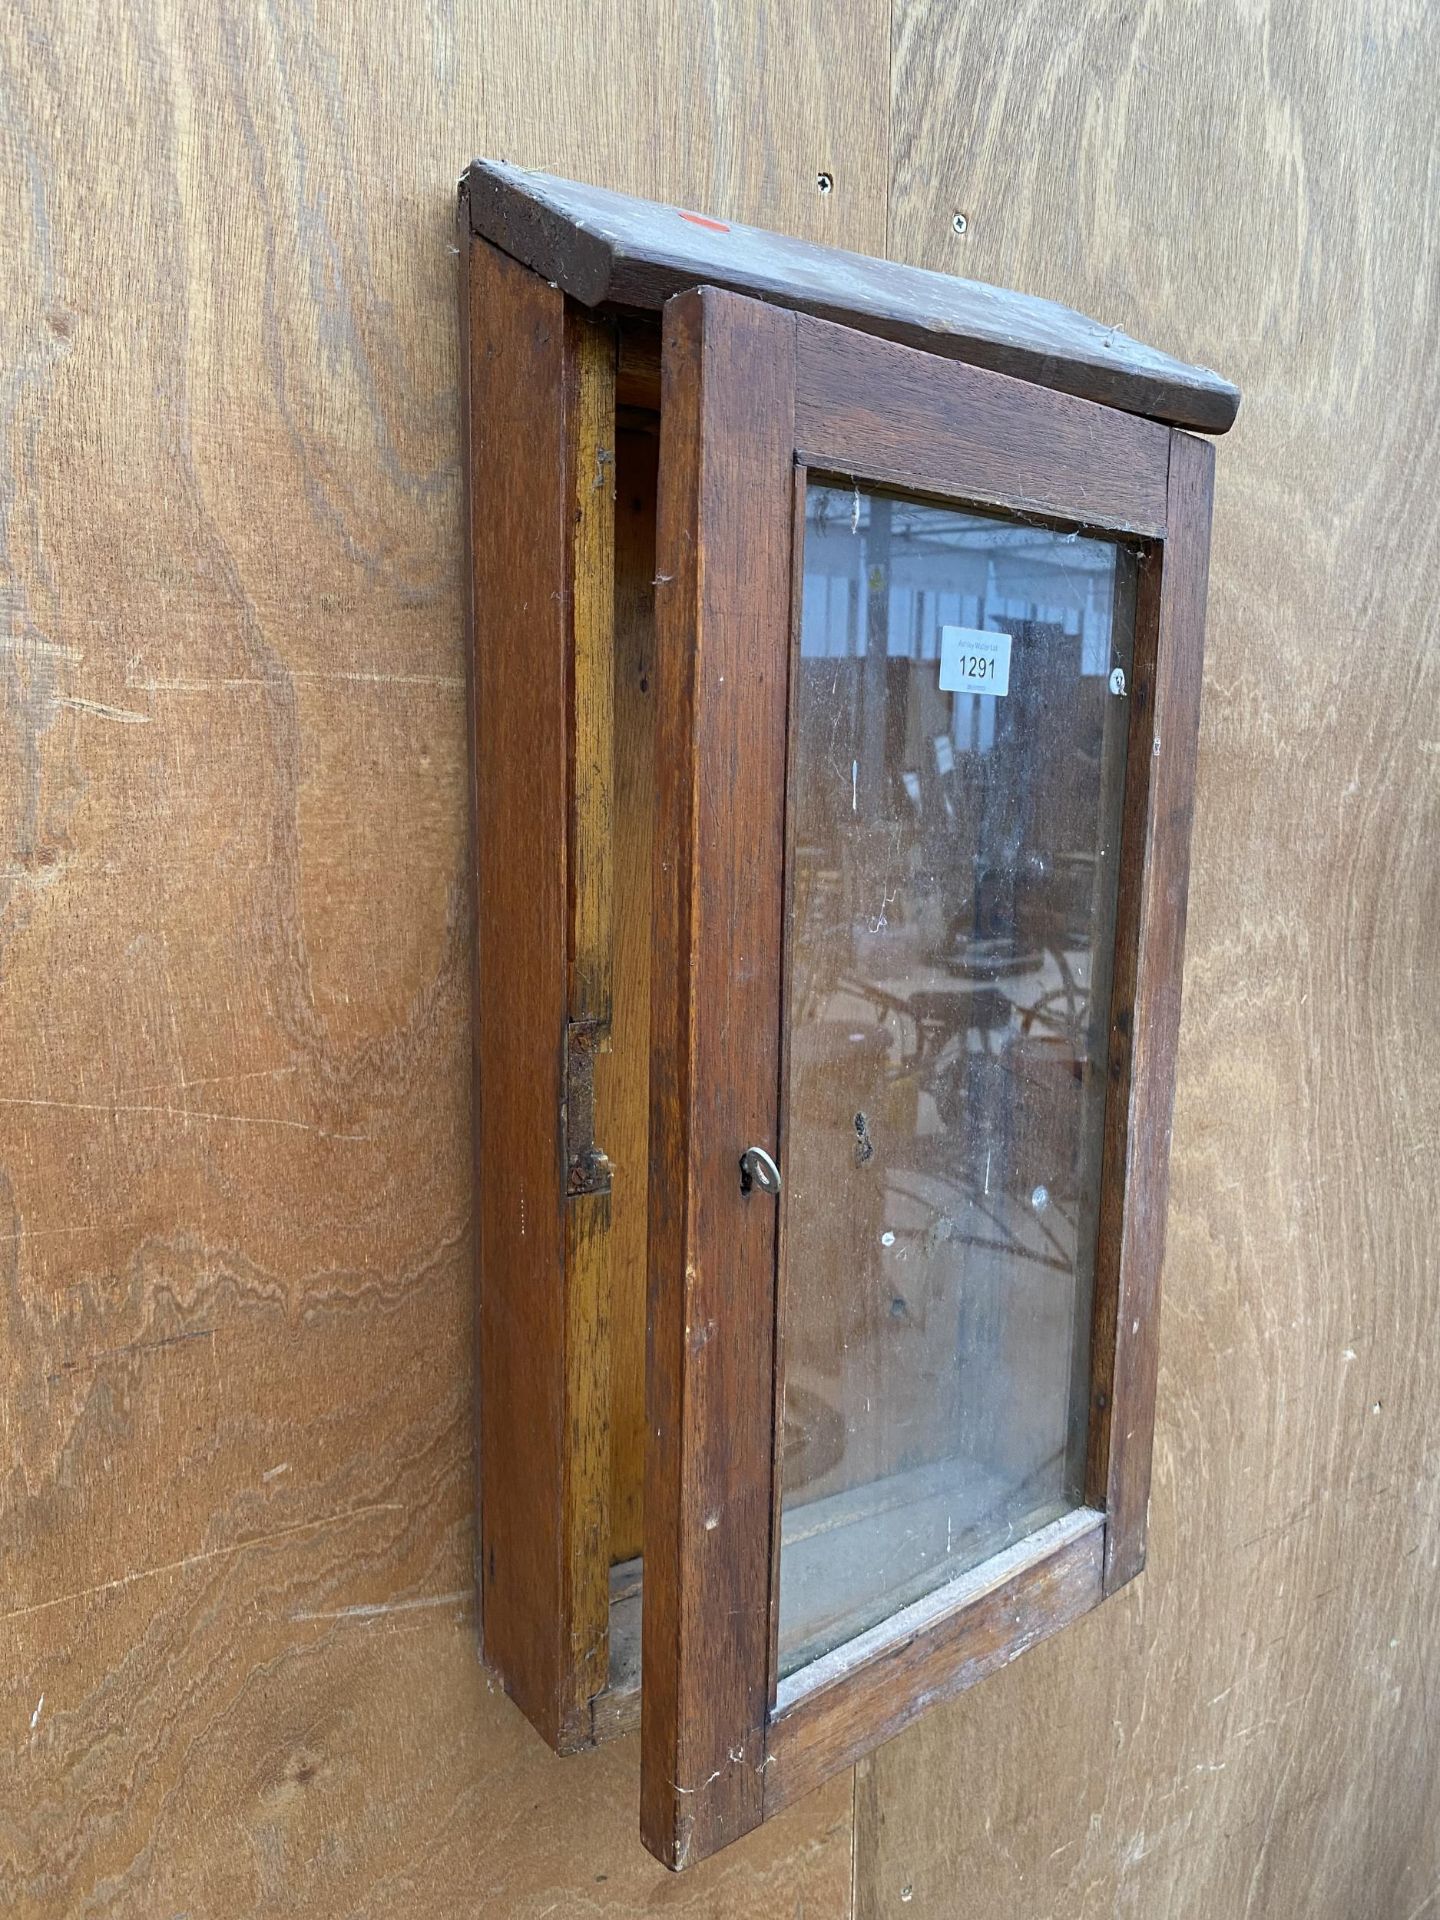 A VINTAGE WOODEN AND GLAZED WALL DISPLAY CABINET